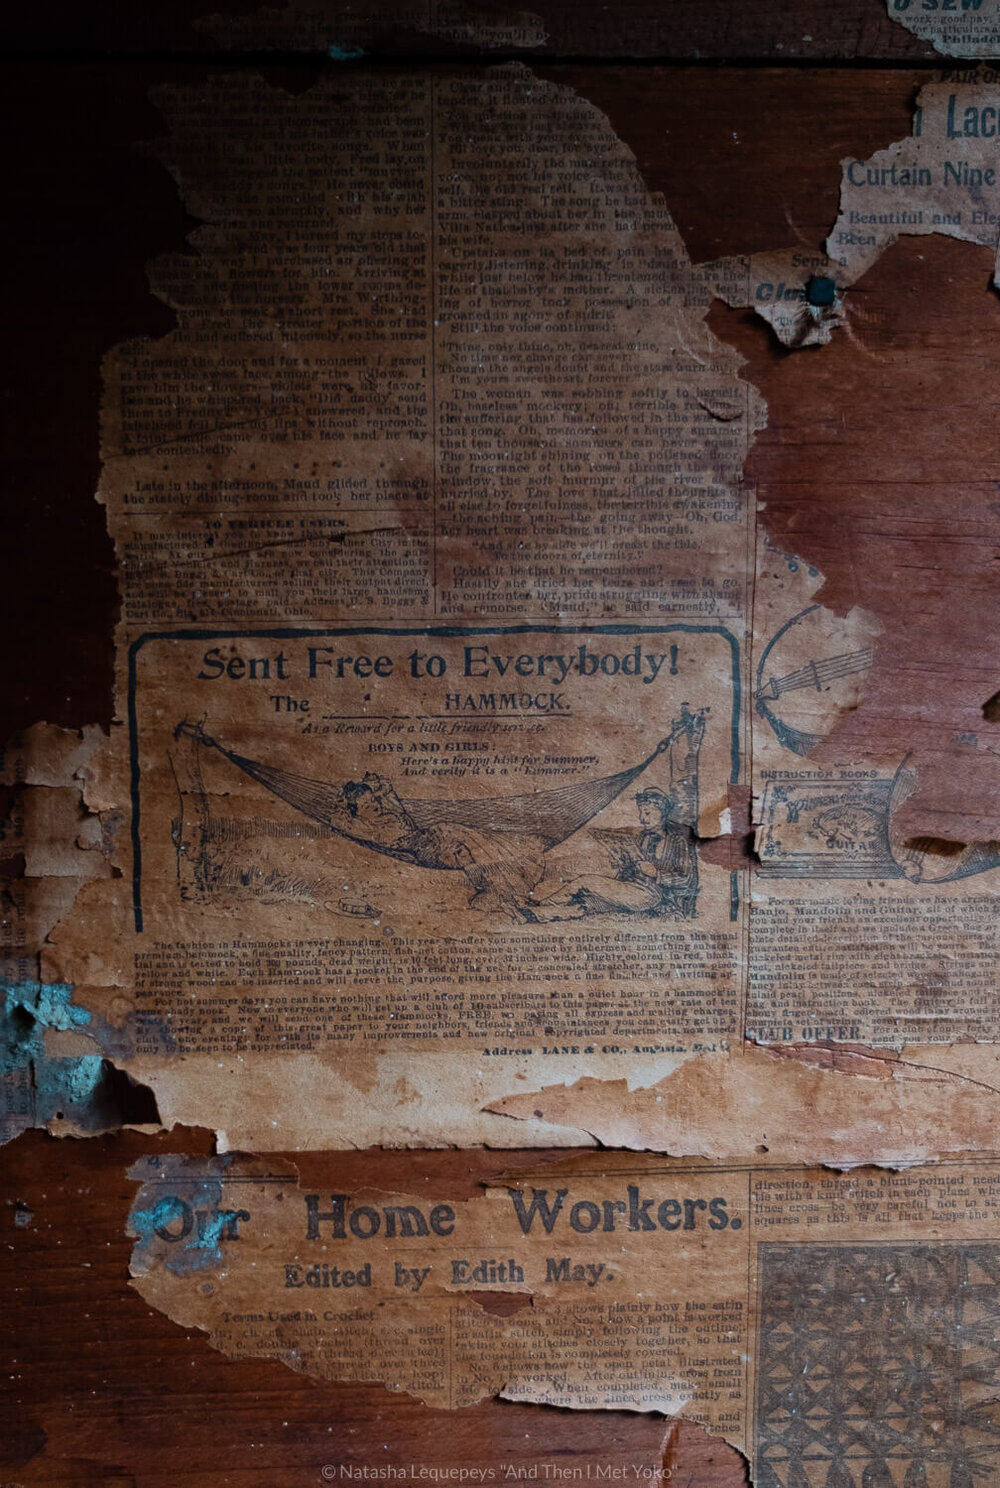 Interior newspaper wallpaper at Caldwell house, Smoky Mountains. Travel photography and guide by © Natasha Lequepeys for "And Then I Met Yoko". #smokymountains #usa #travelblog #travelphotography